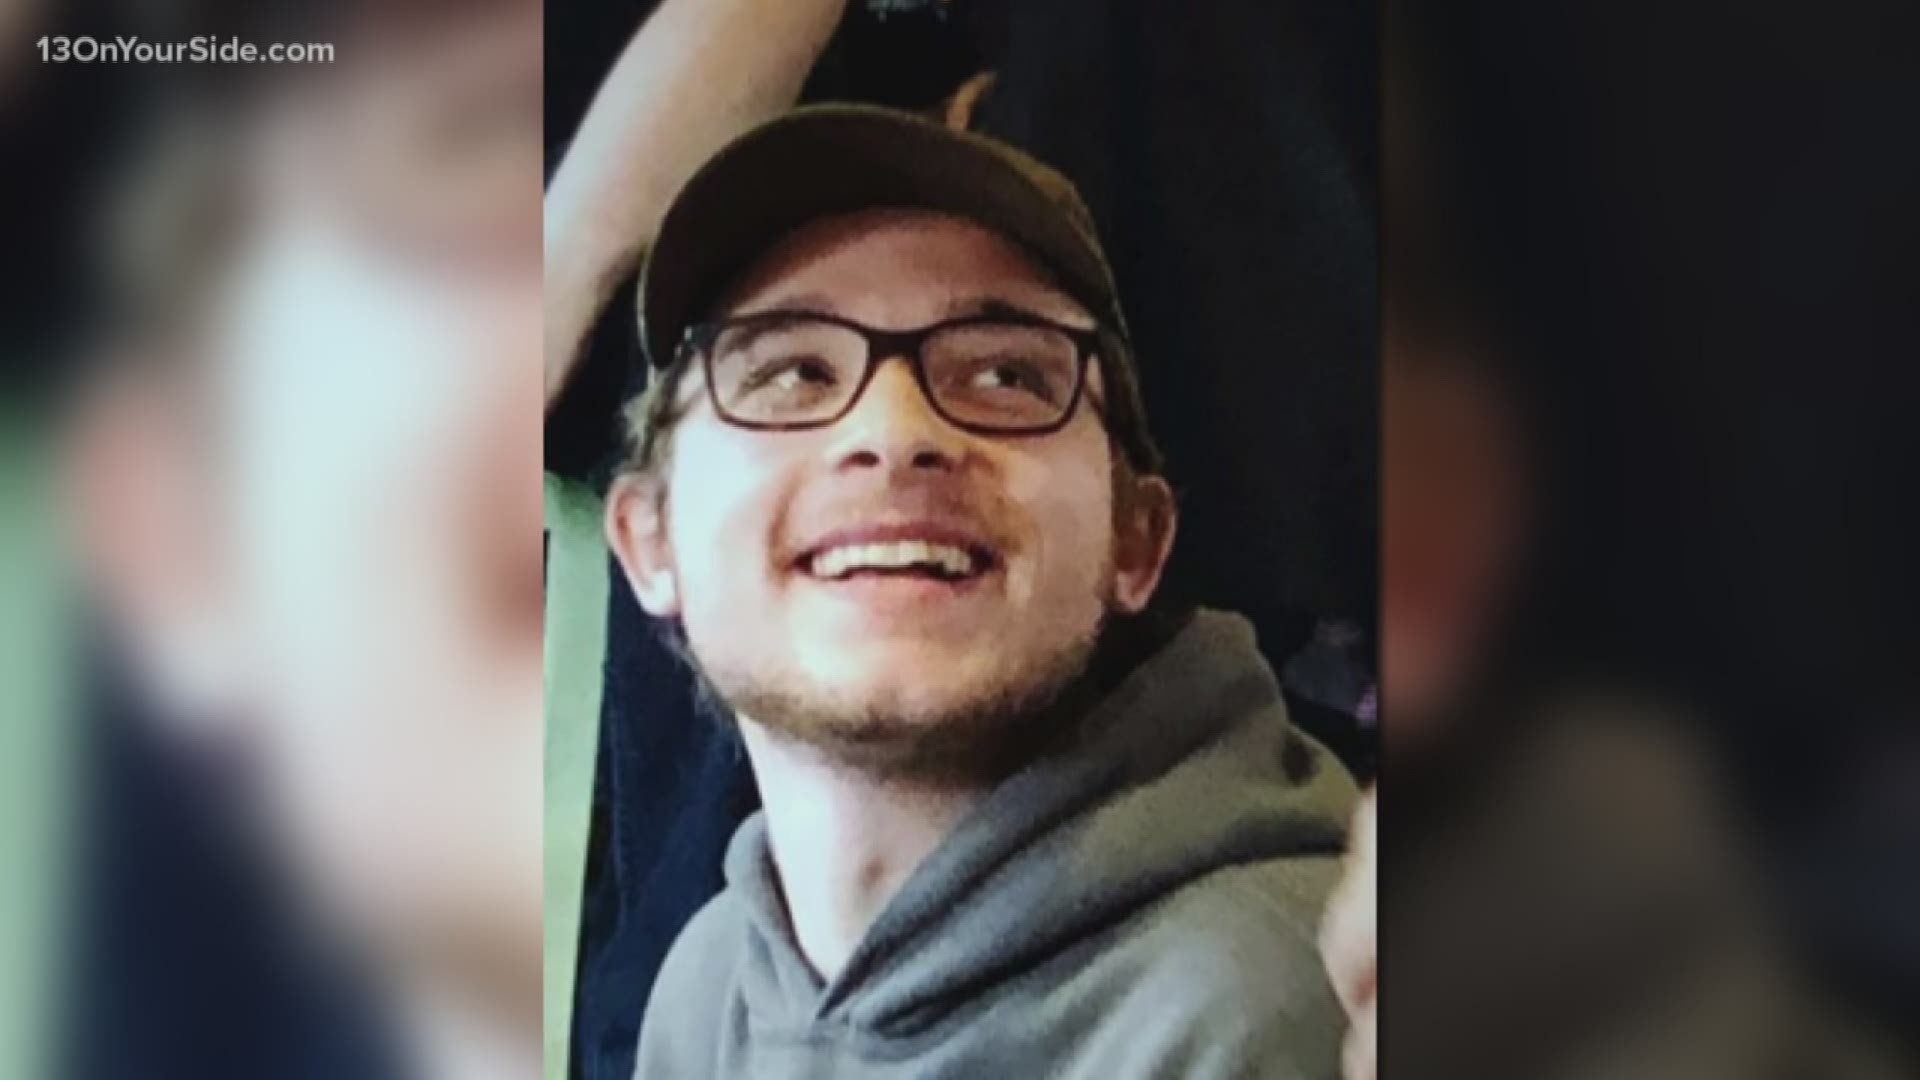 Creative Paint Studio in Coopersville is hosting a fundraiser for Hunter Klompstra's family. Hunter's been missing since the beginning of the year.